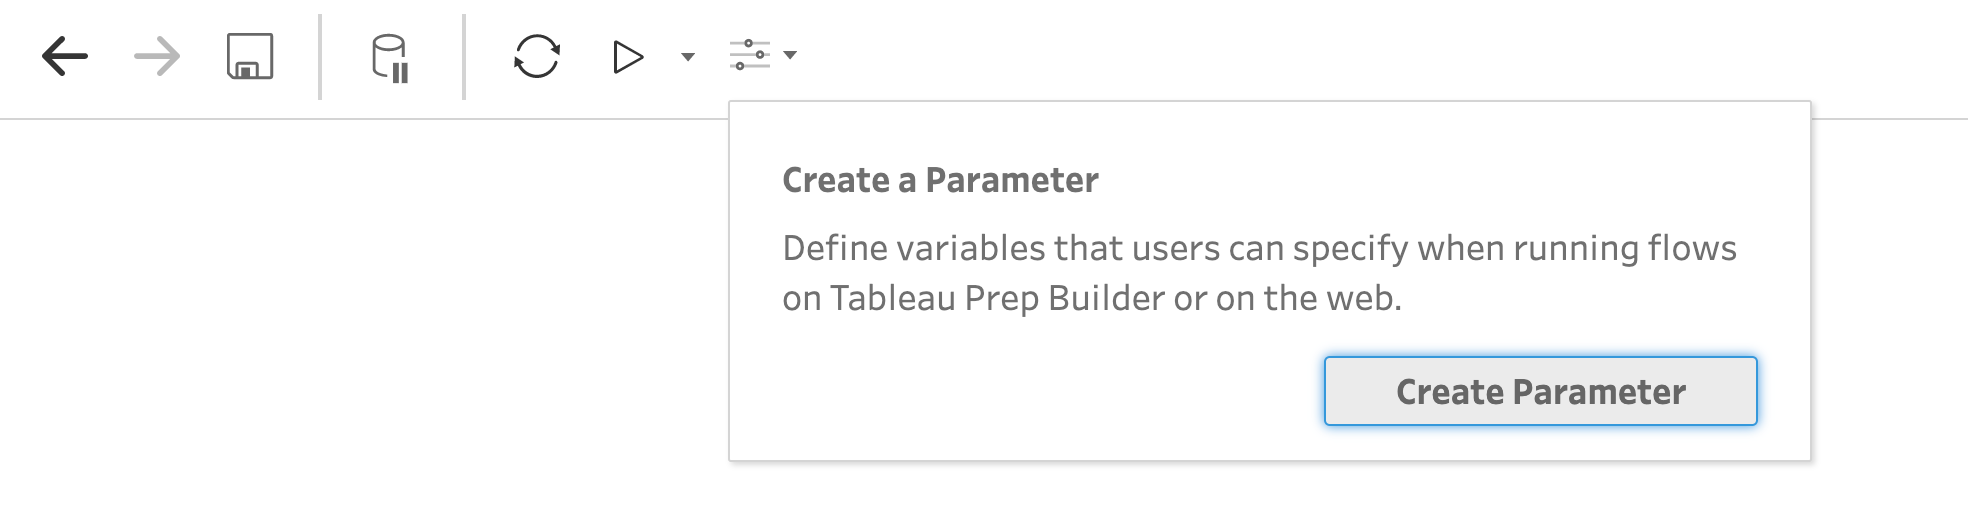 The Tableau Prep Builder interface, showing the button along the top menu to Create a Parameter, and text “Define variables that users can specify when running flows on Tableau Prep Builder or on the web.”